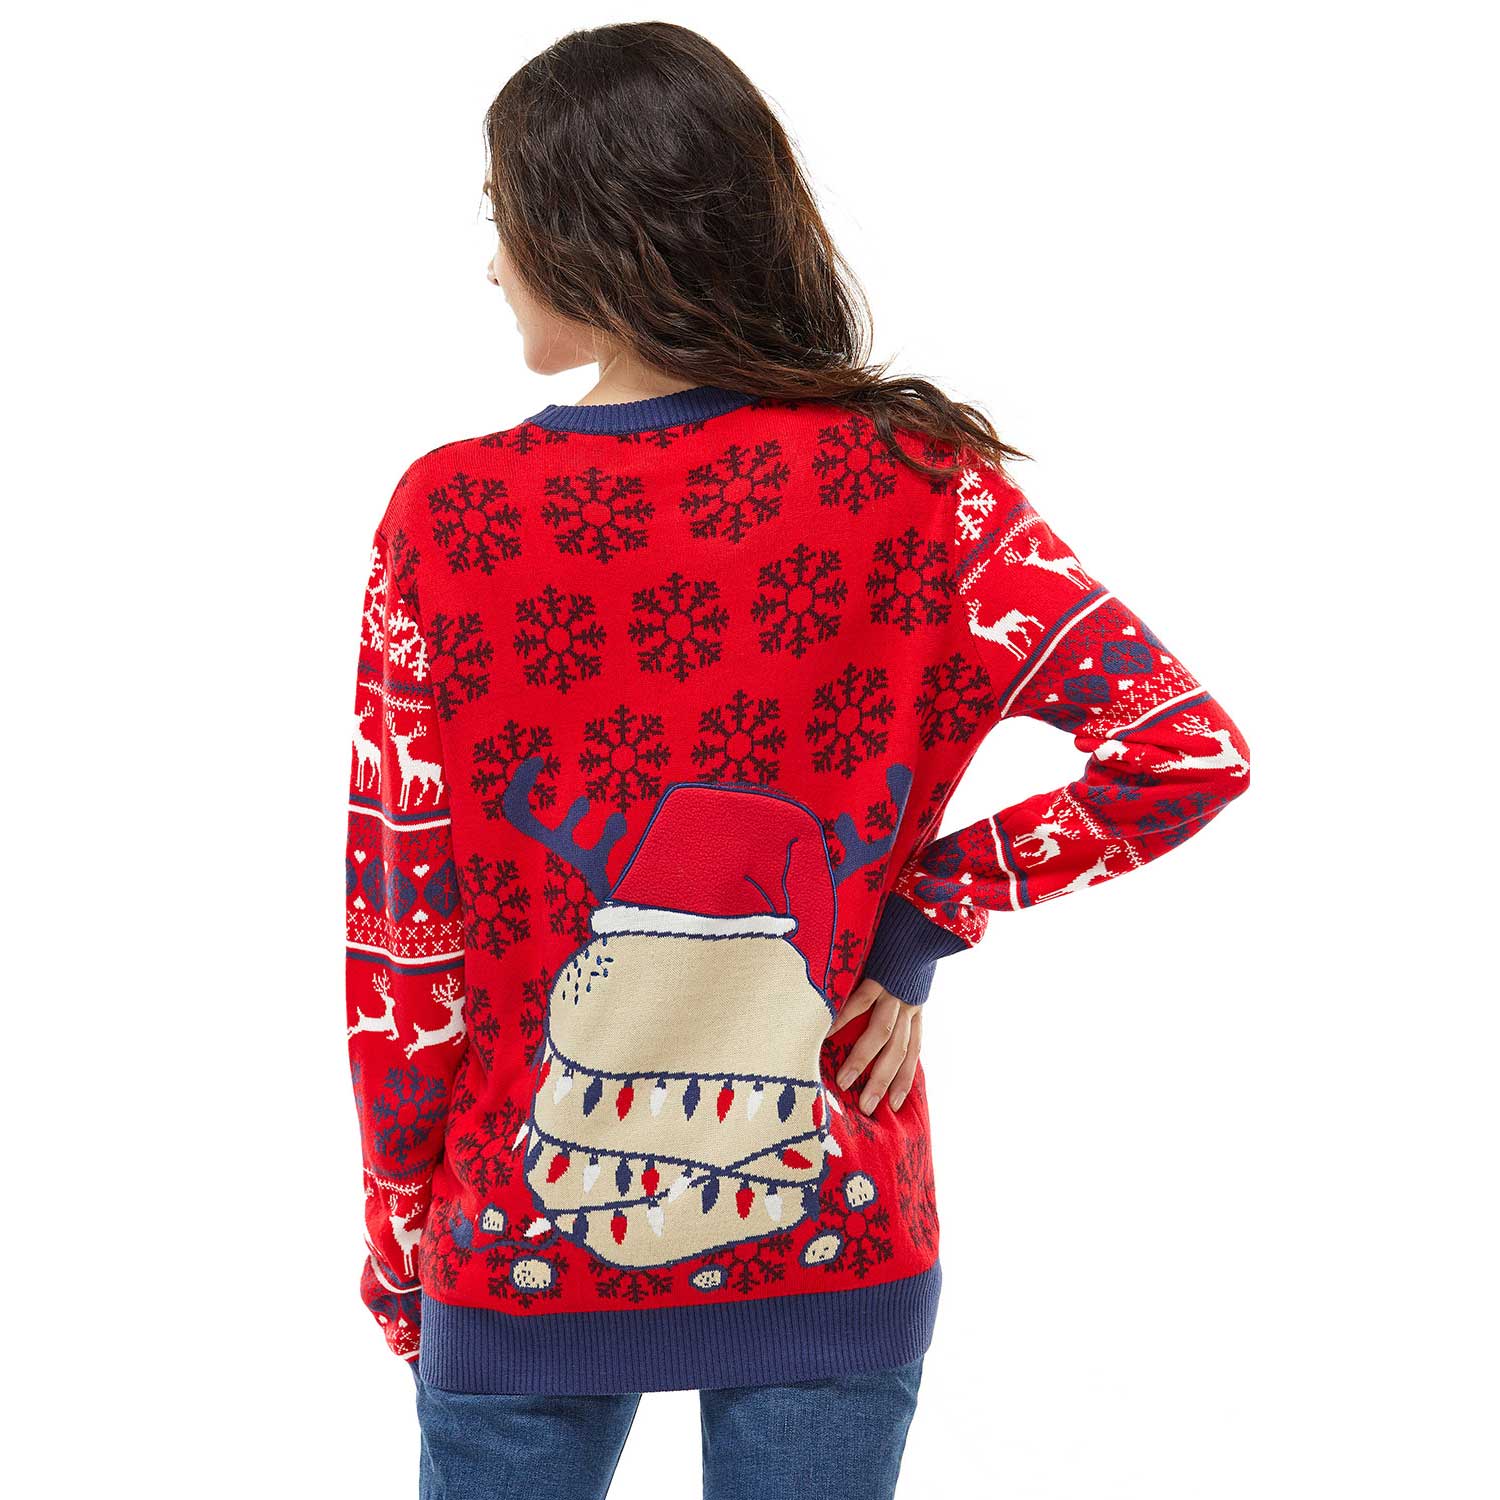 Celebrate the Festive Season with Couples Ugly Christmas Sweater